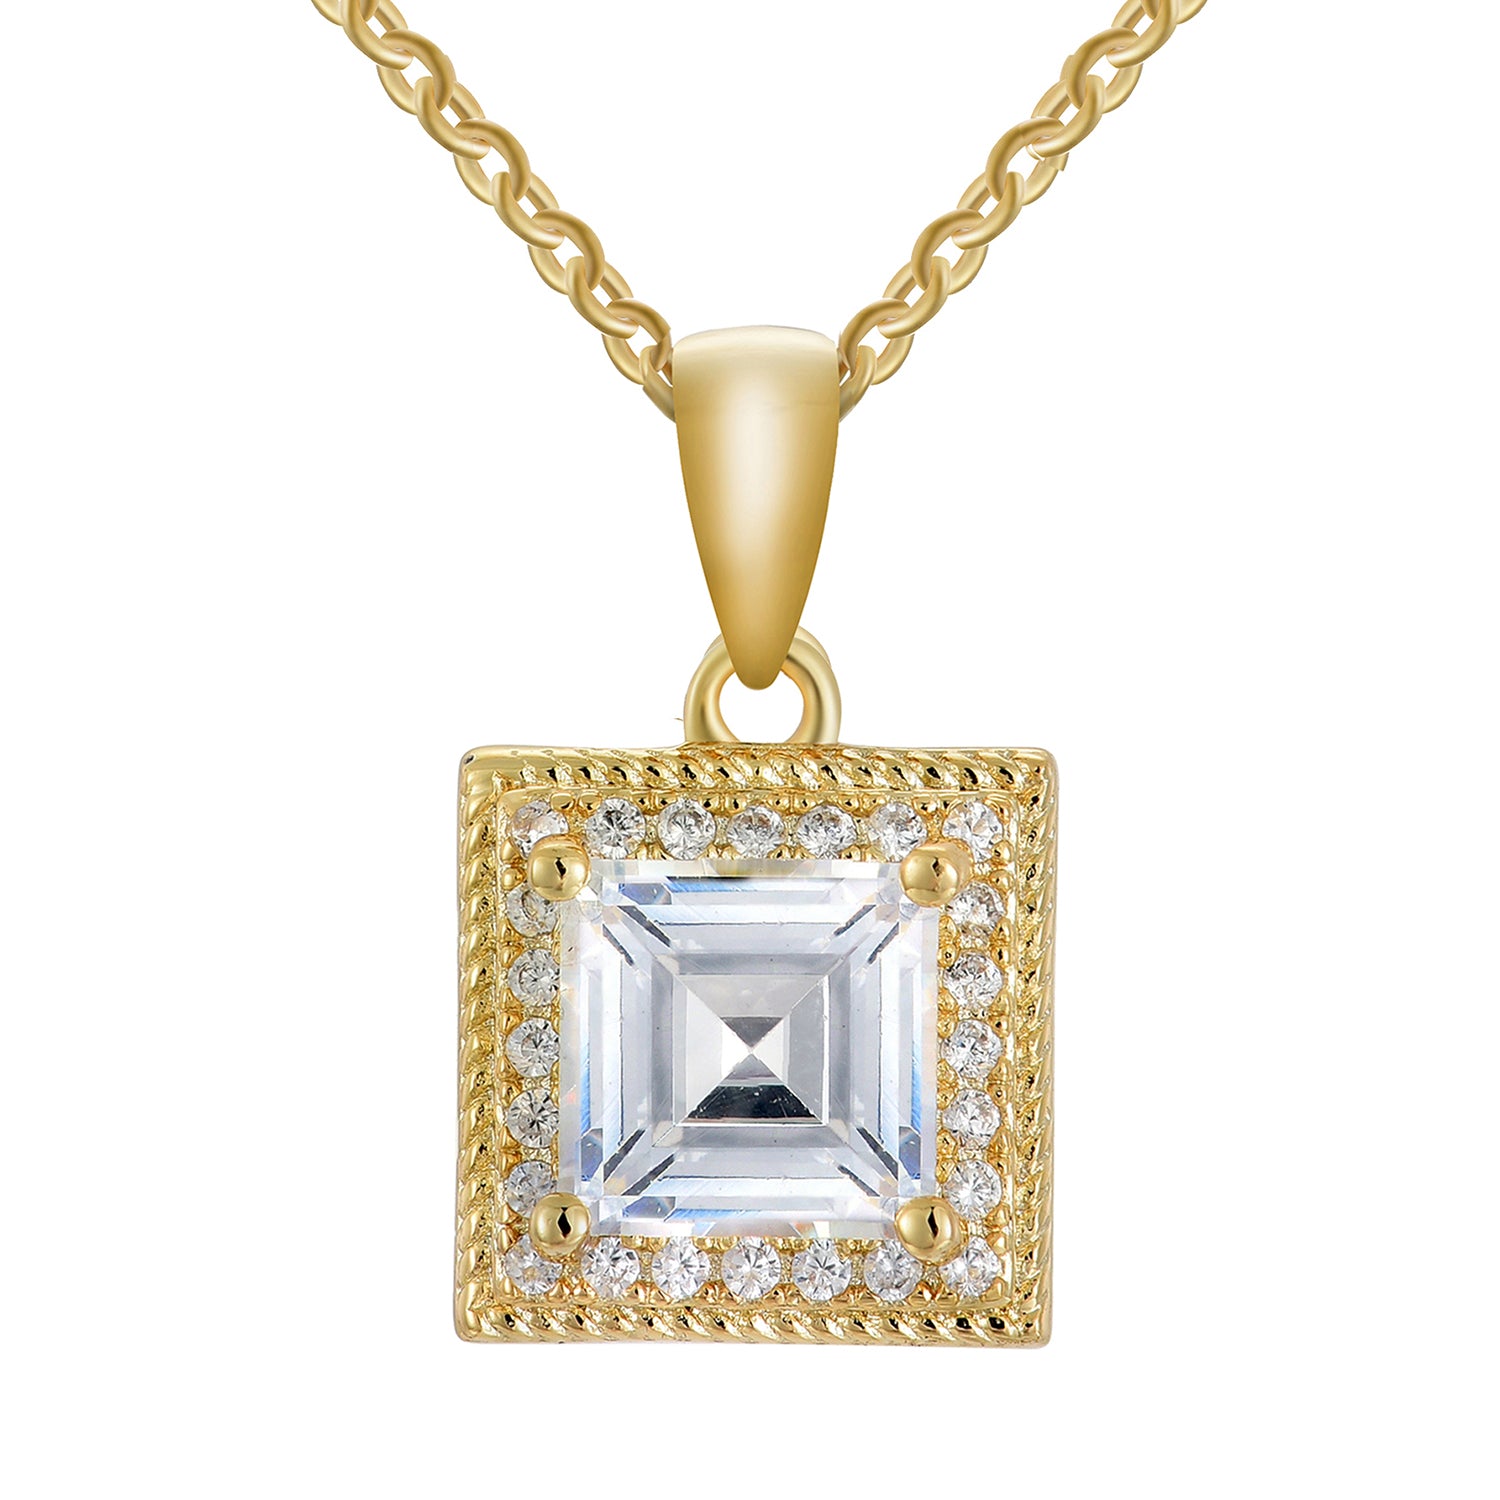 Madison 18k White Gold Plated Silver Necklace with Princess Cut Simulated Diamond CZ Crystals